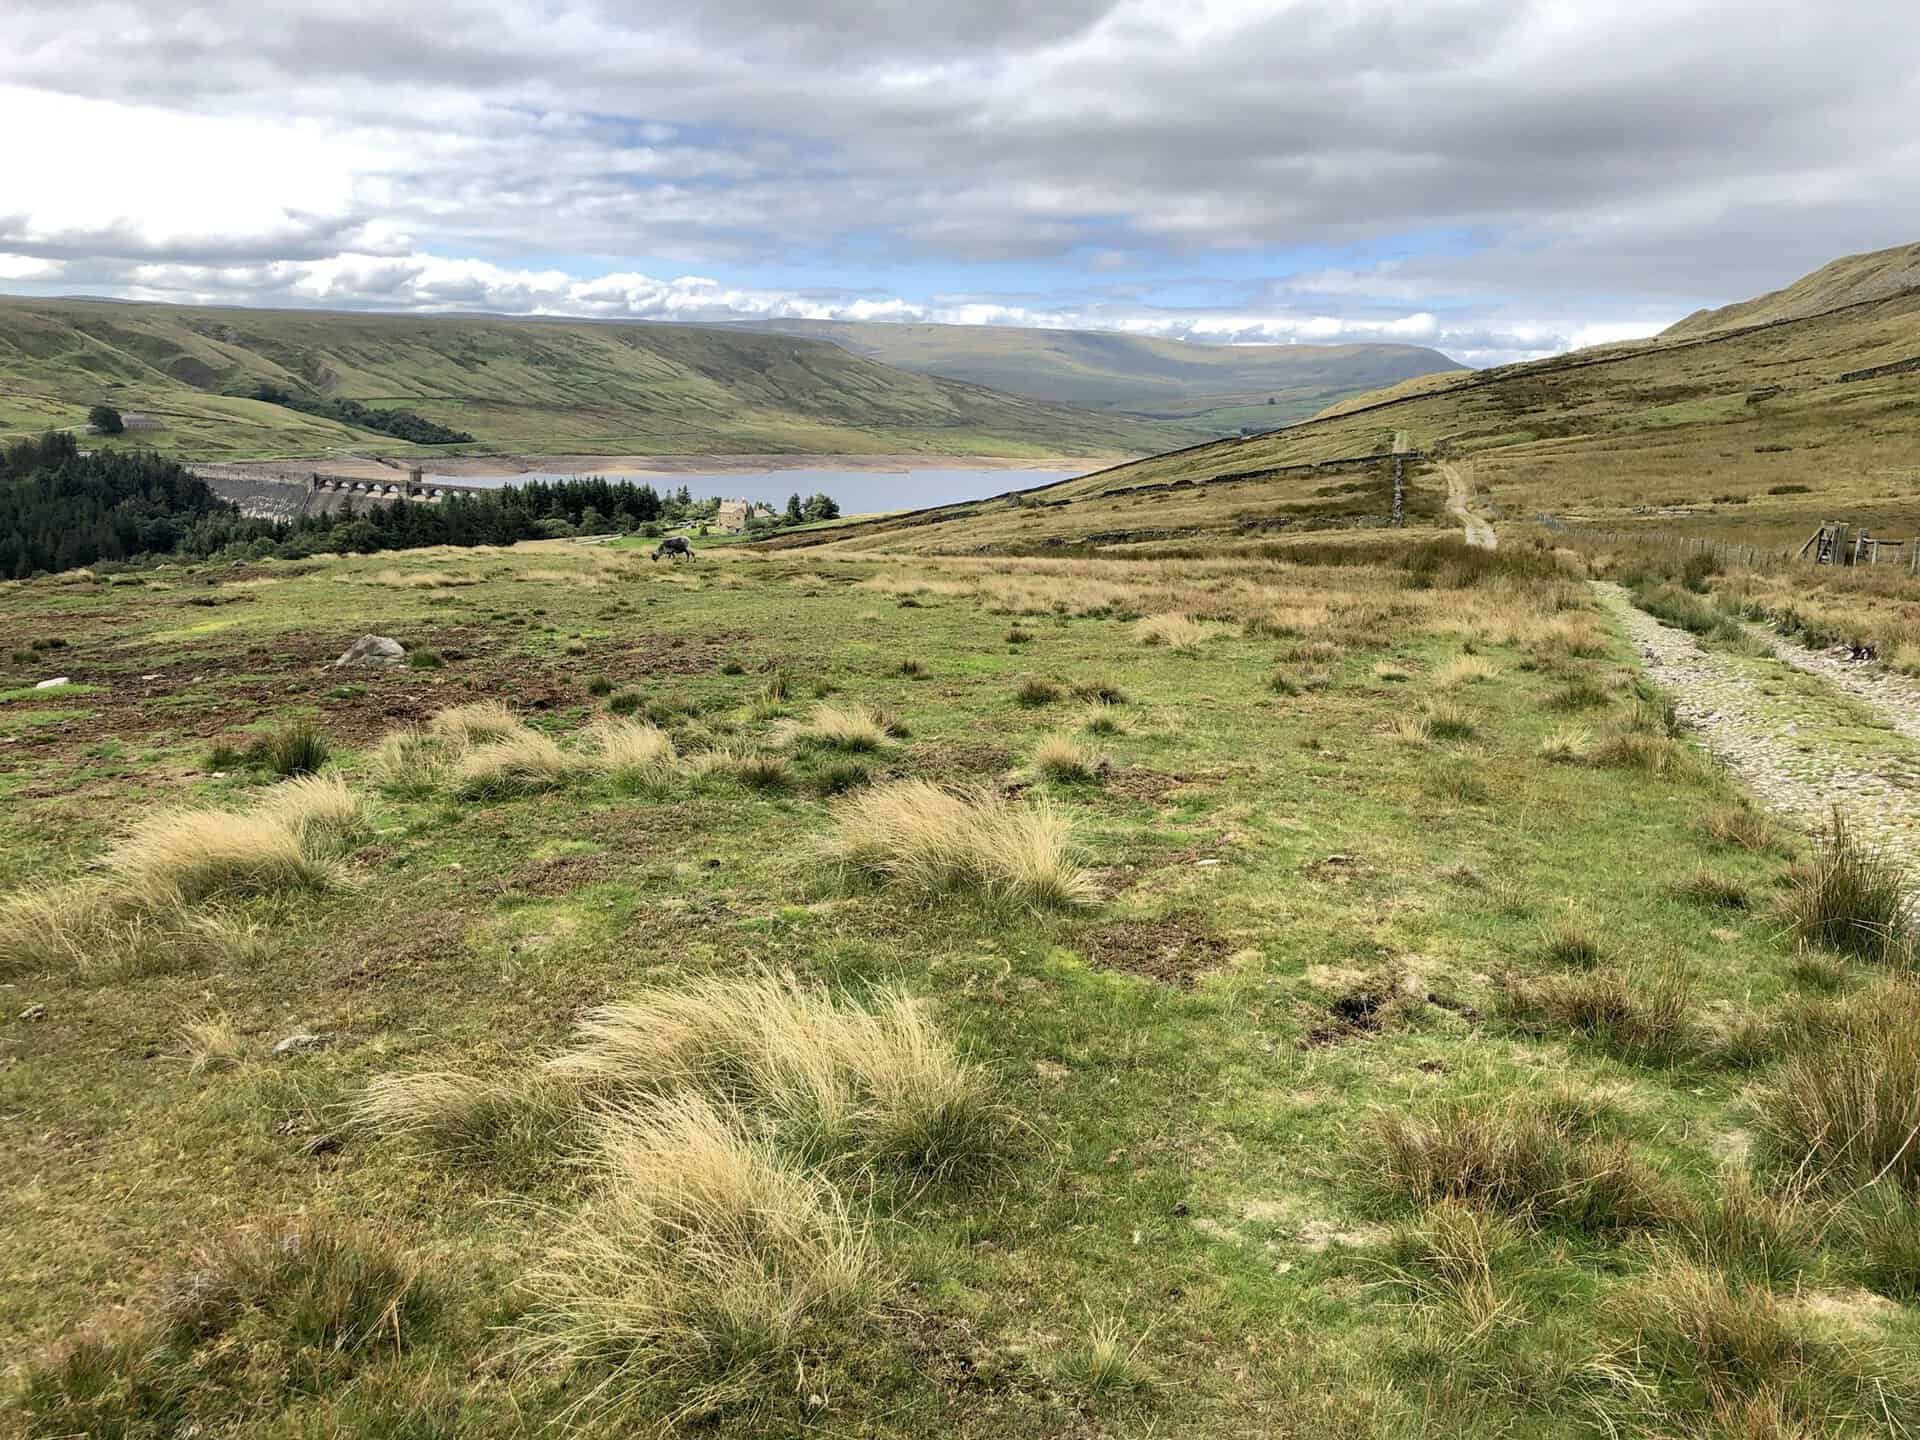 The approach to Scar House Reservoir.